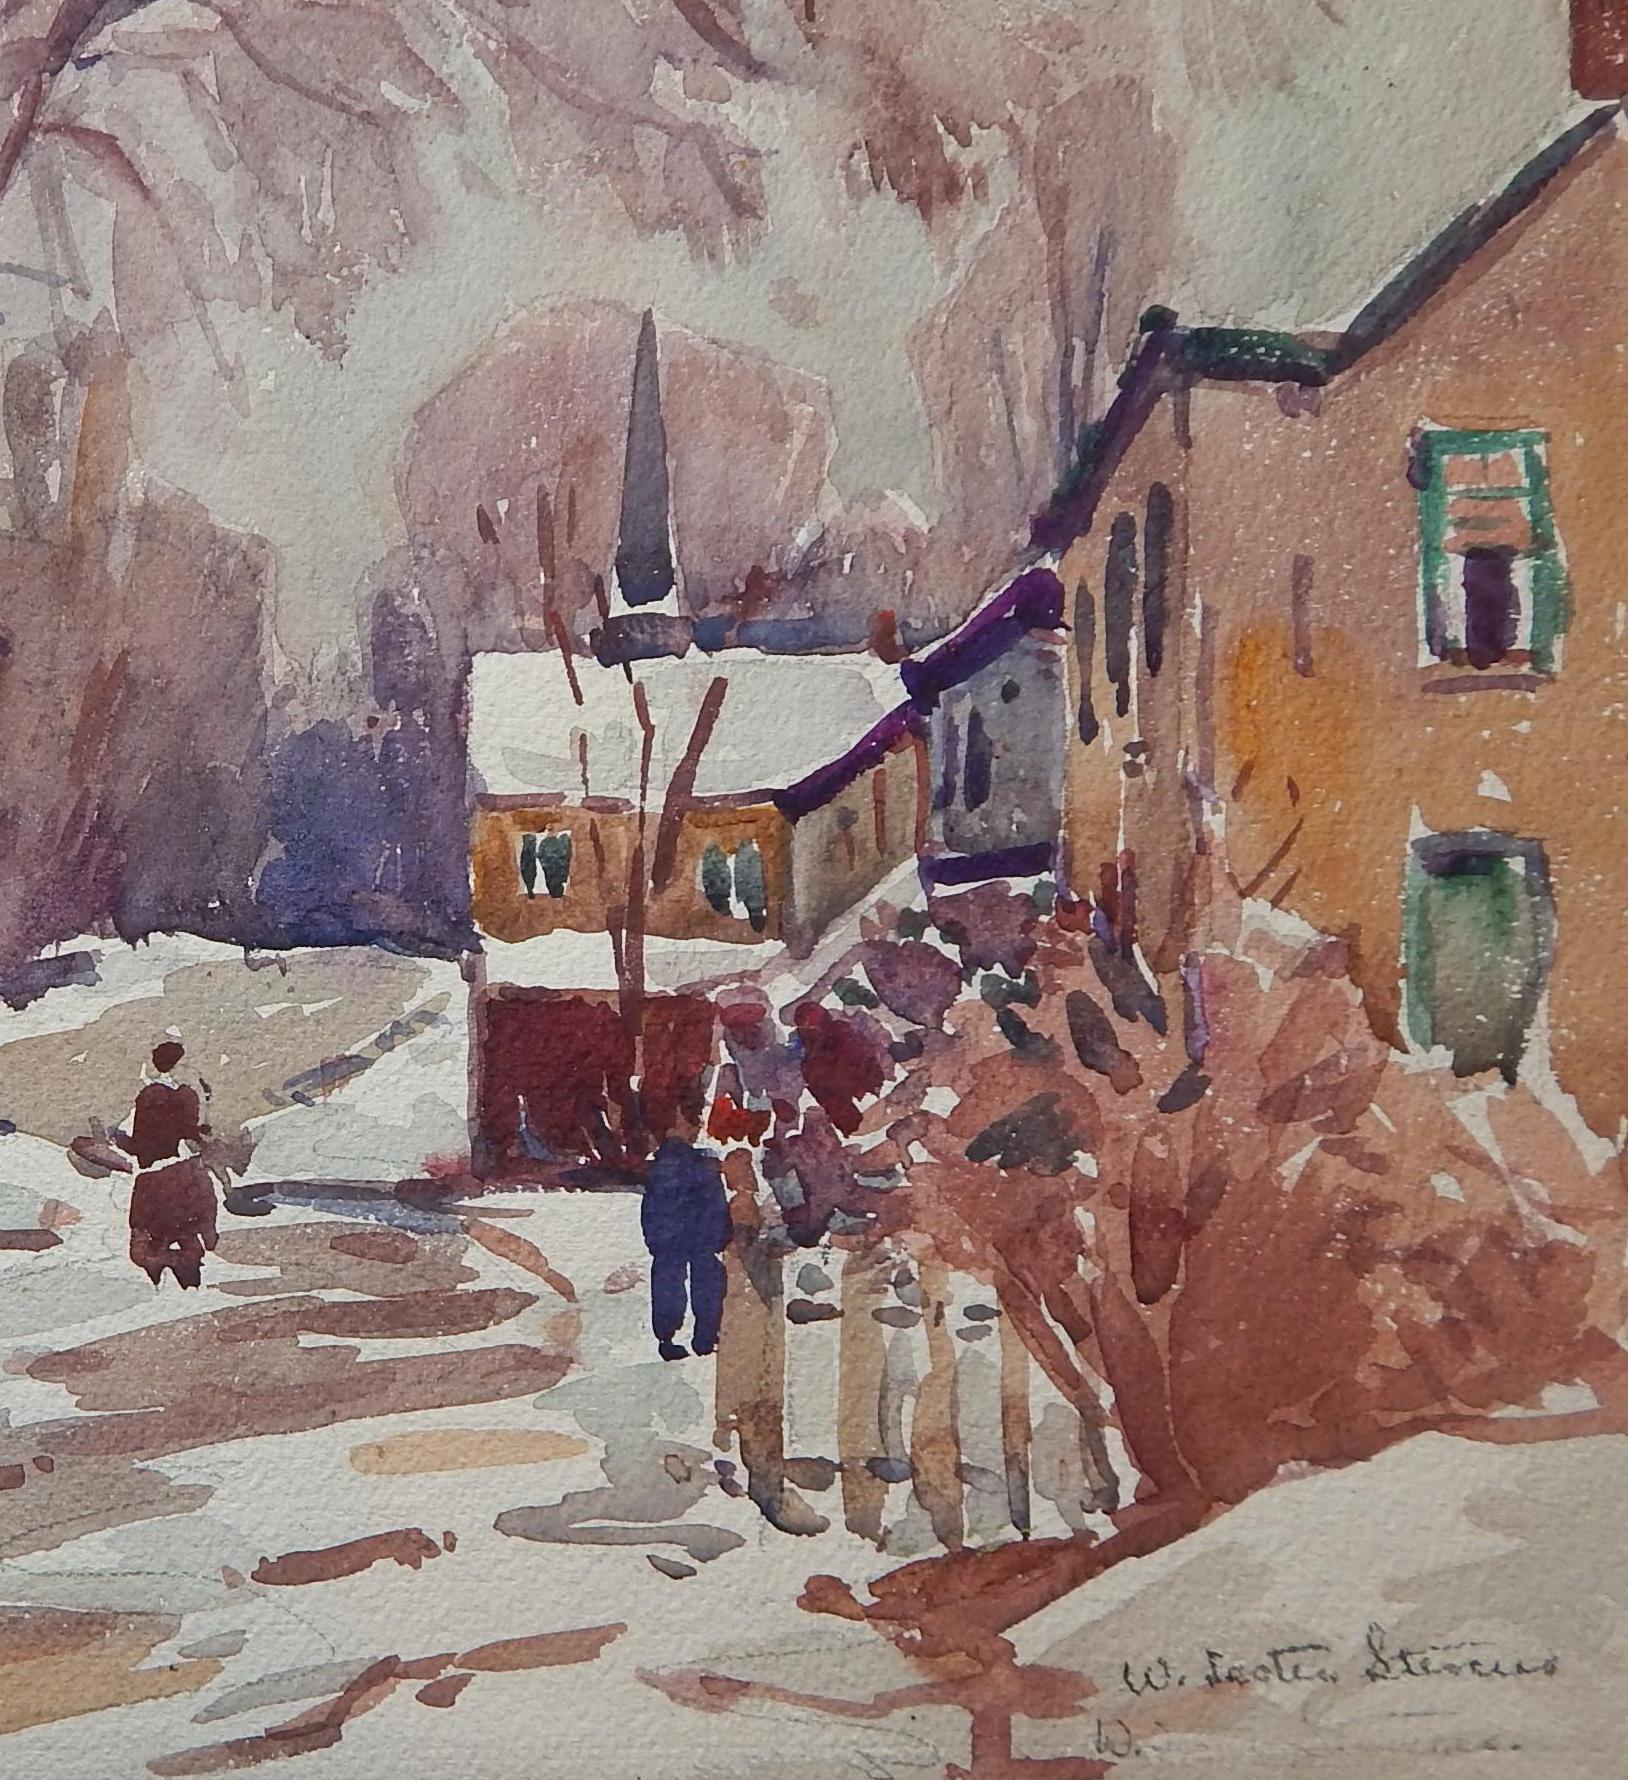 Paint William Lester Stevens Watercolor, circa 1920s-1930s New England Village in Snow